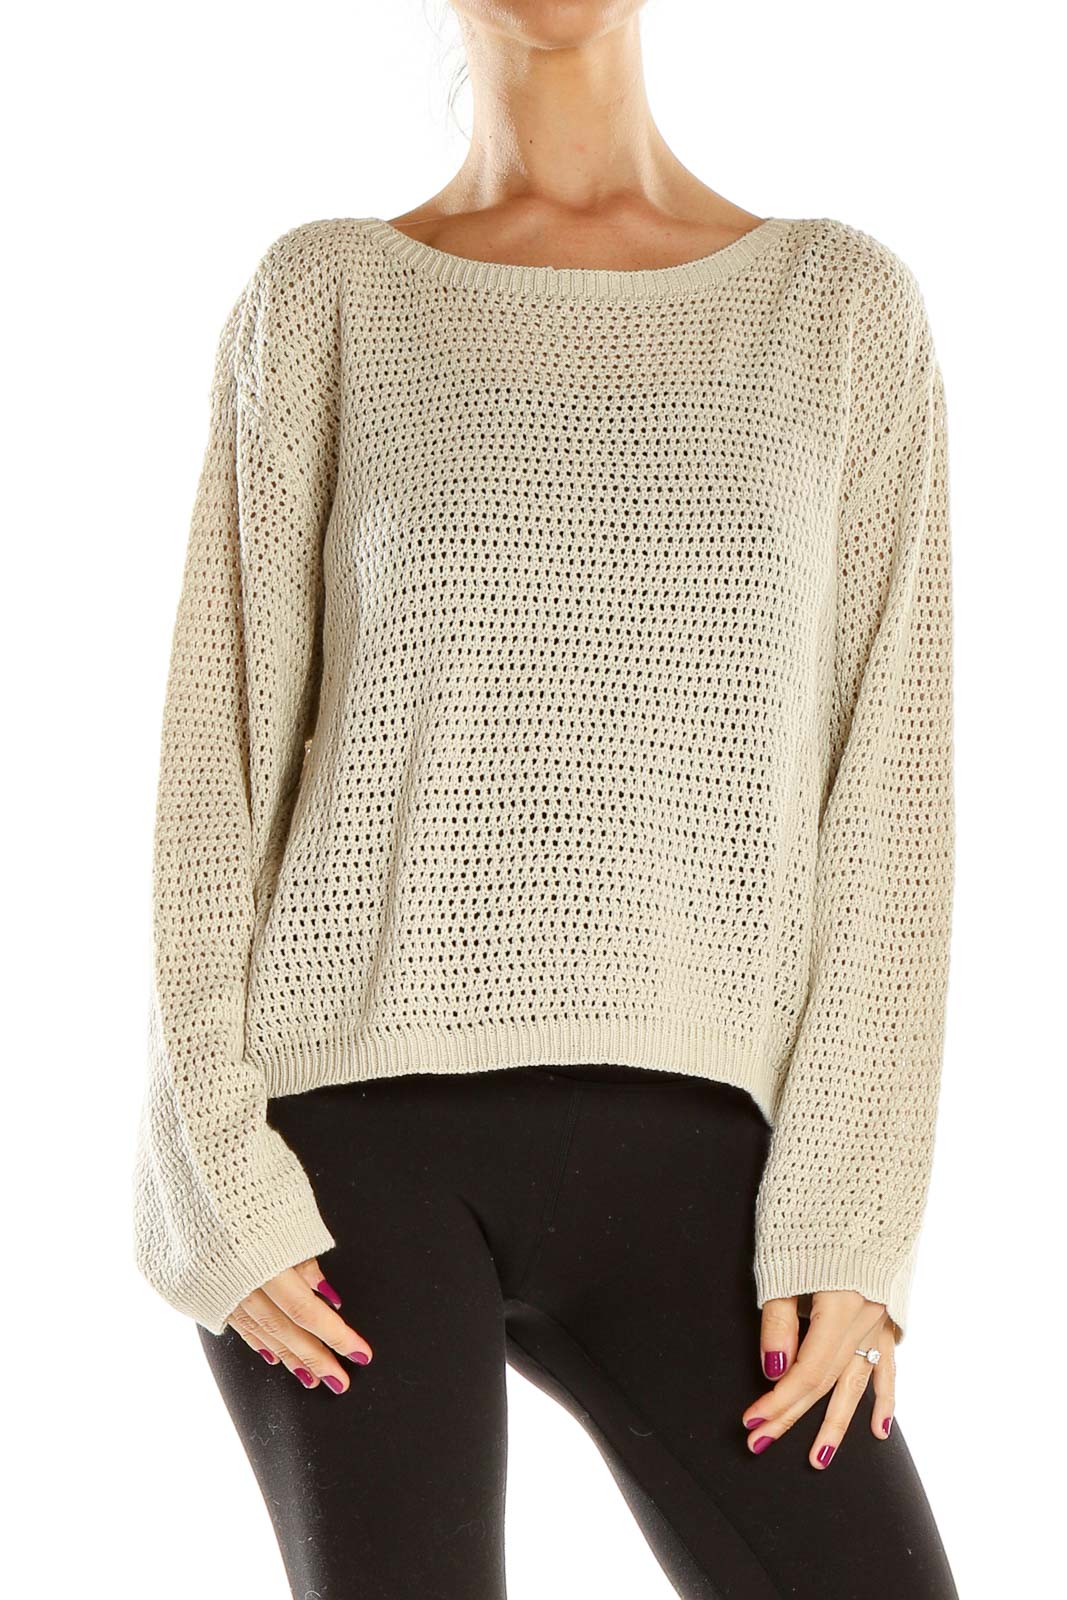 Beige Woven All Day Wear Top Front